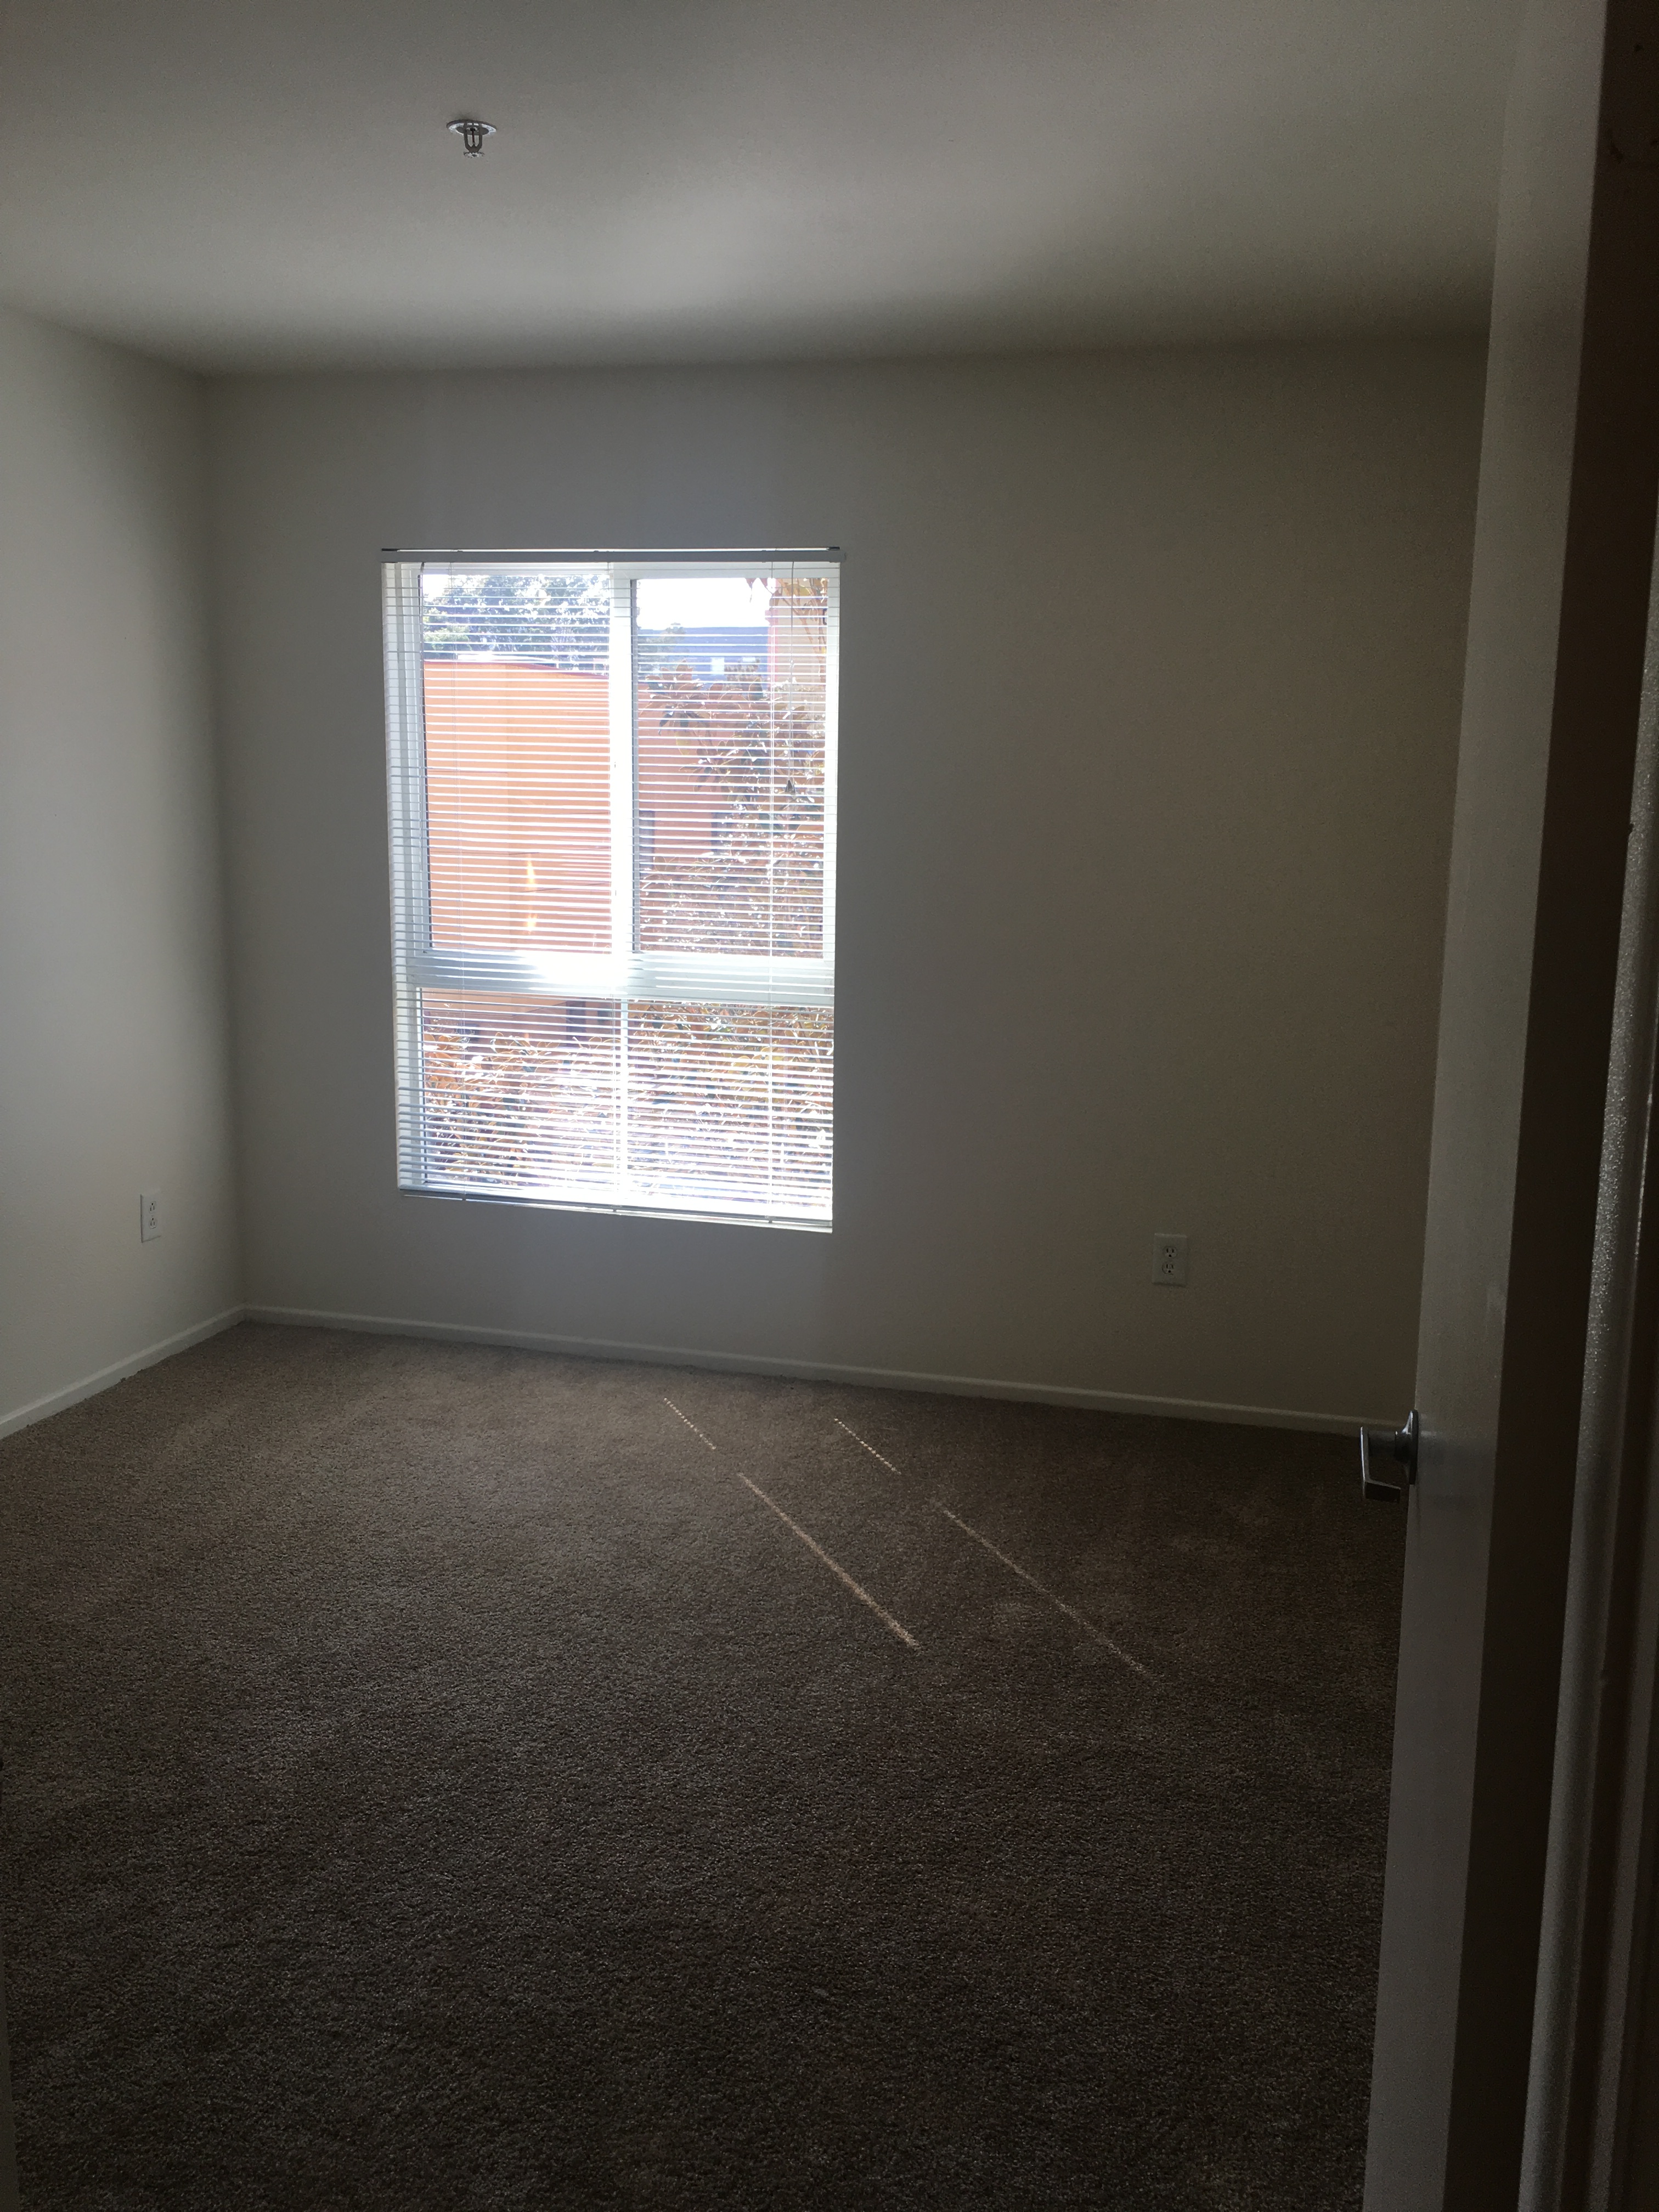 Image of the apartment bedroom with brown carpet